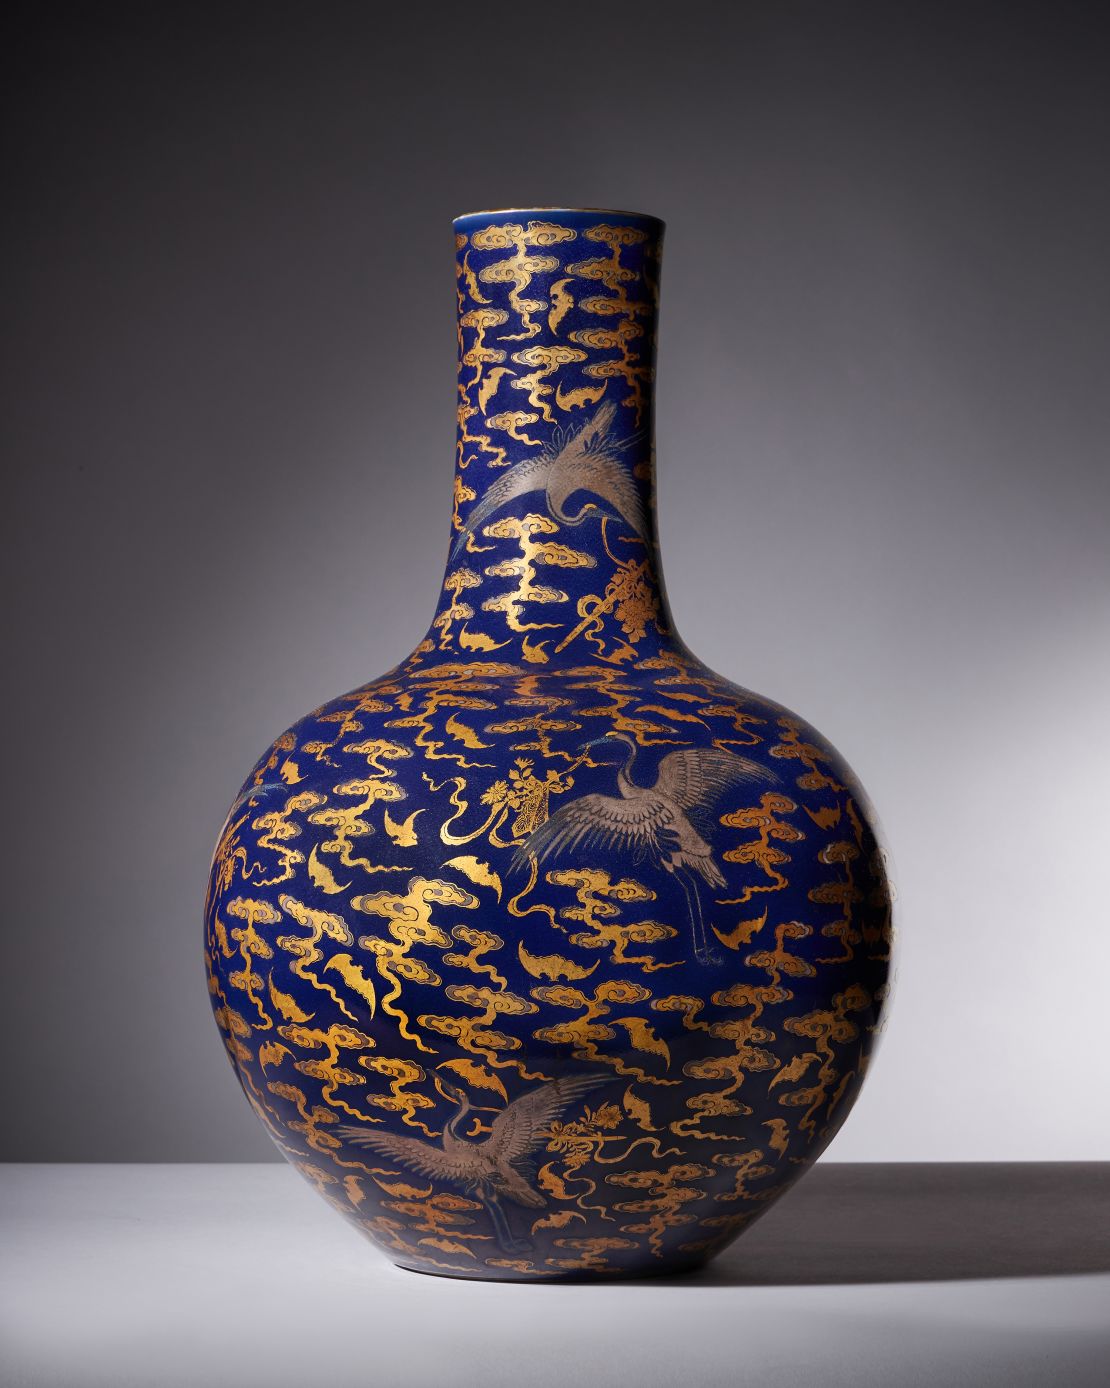 Estimated to sell for £100,000 to £150,000 ($124,000 to $186,000), the vase will be on auction at Dreweatts on May 18.